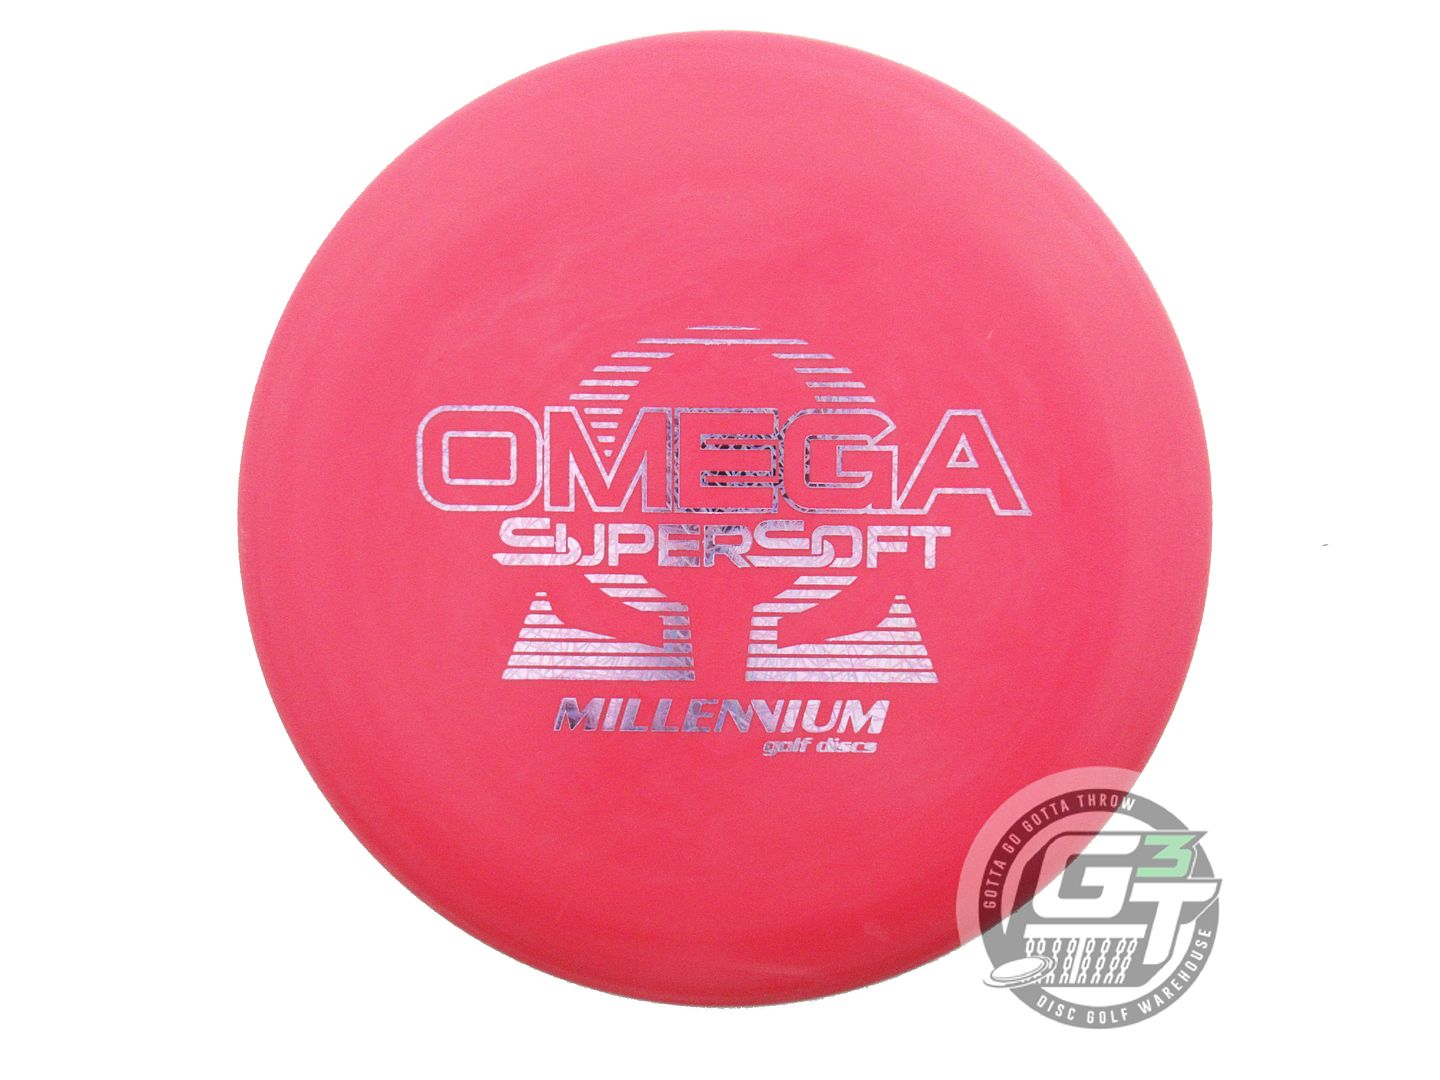 Millennium Standard Omega SuperSoft Putter Golf Disc (Individually Listed)